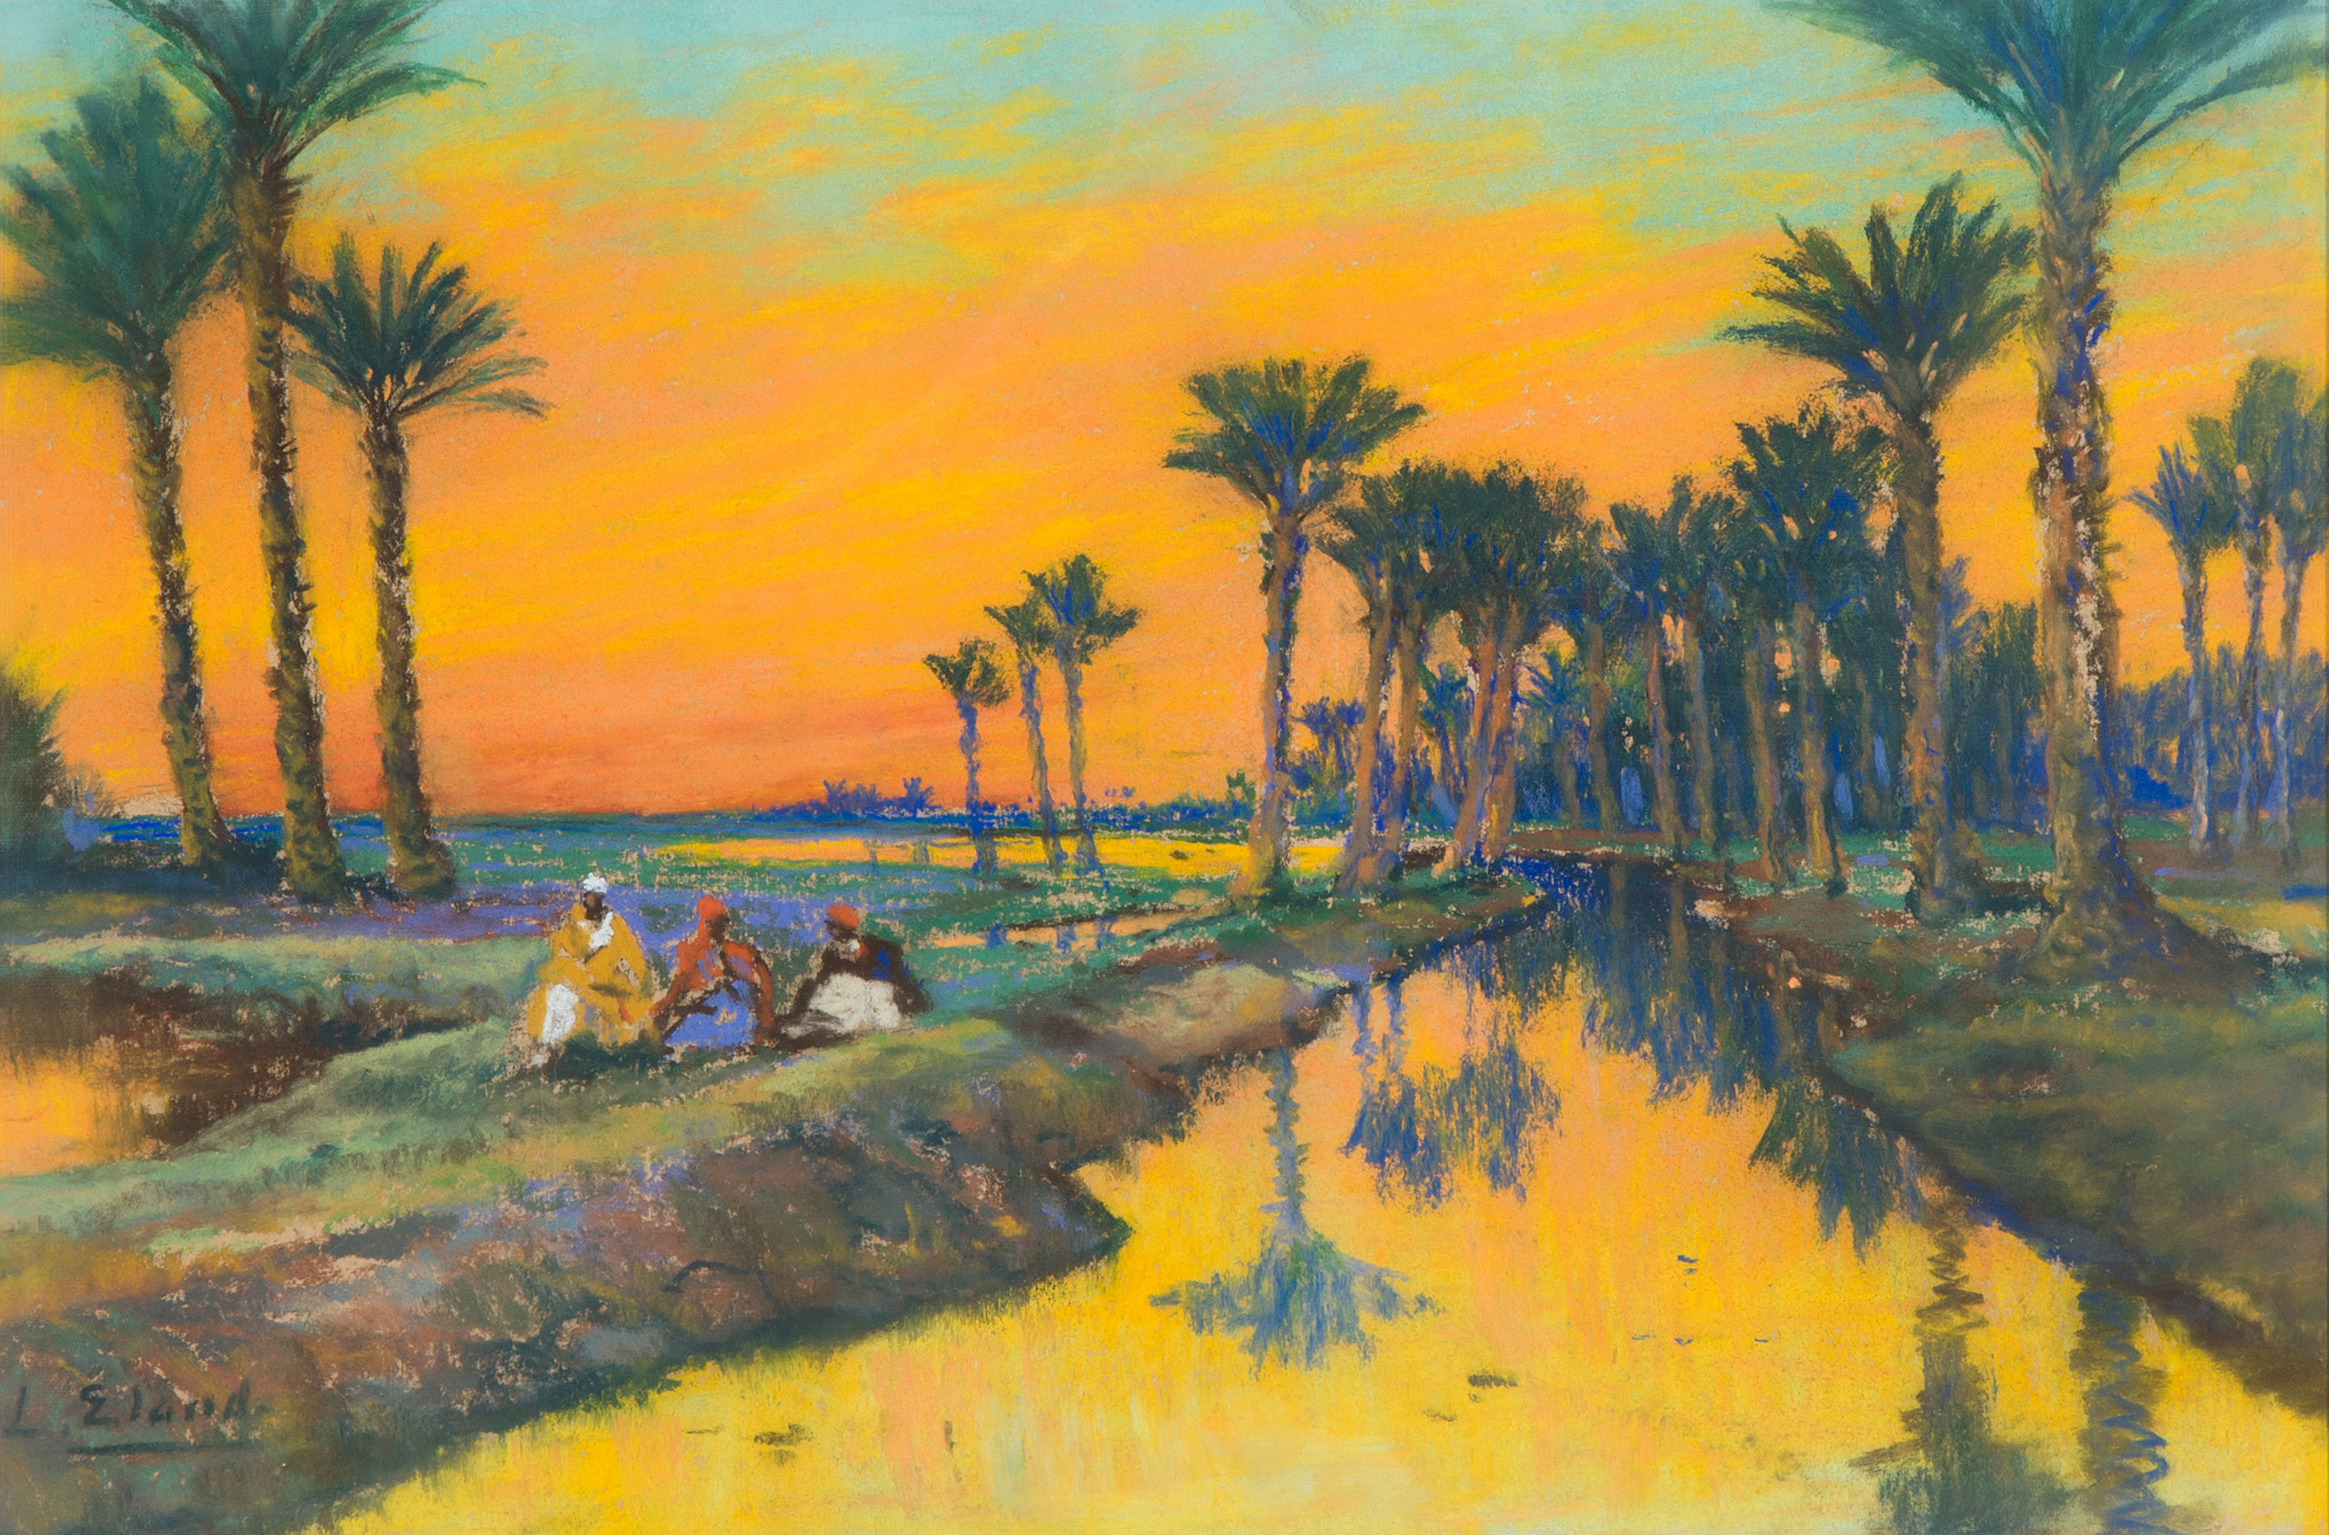 Palm trees along an irrigation canal, Egypt